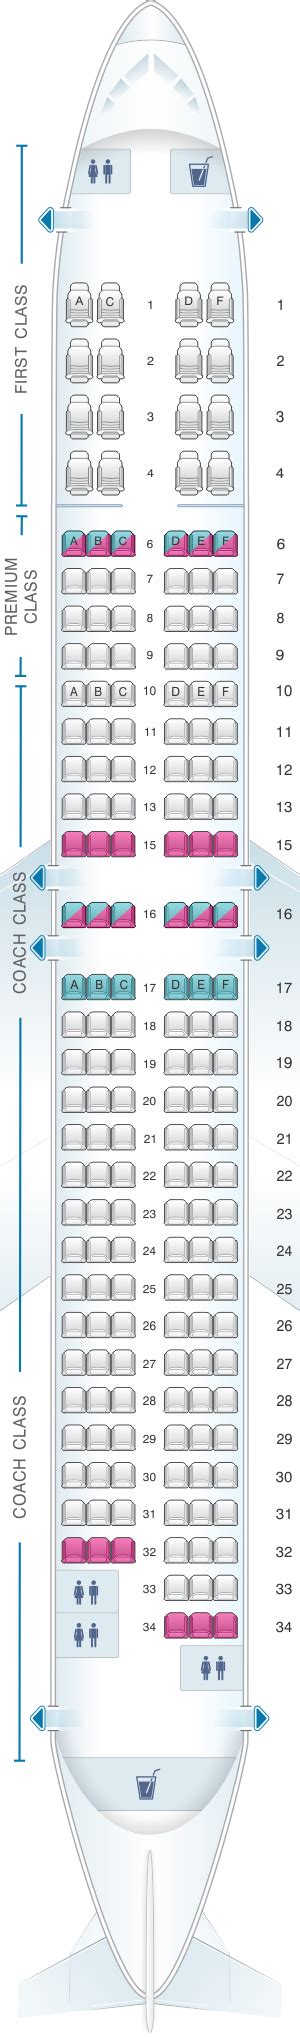 Alaska Airlines Seating Chart 737 900 Two Birds Home